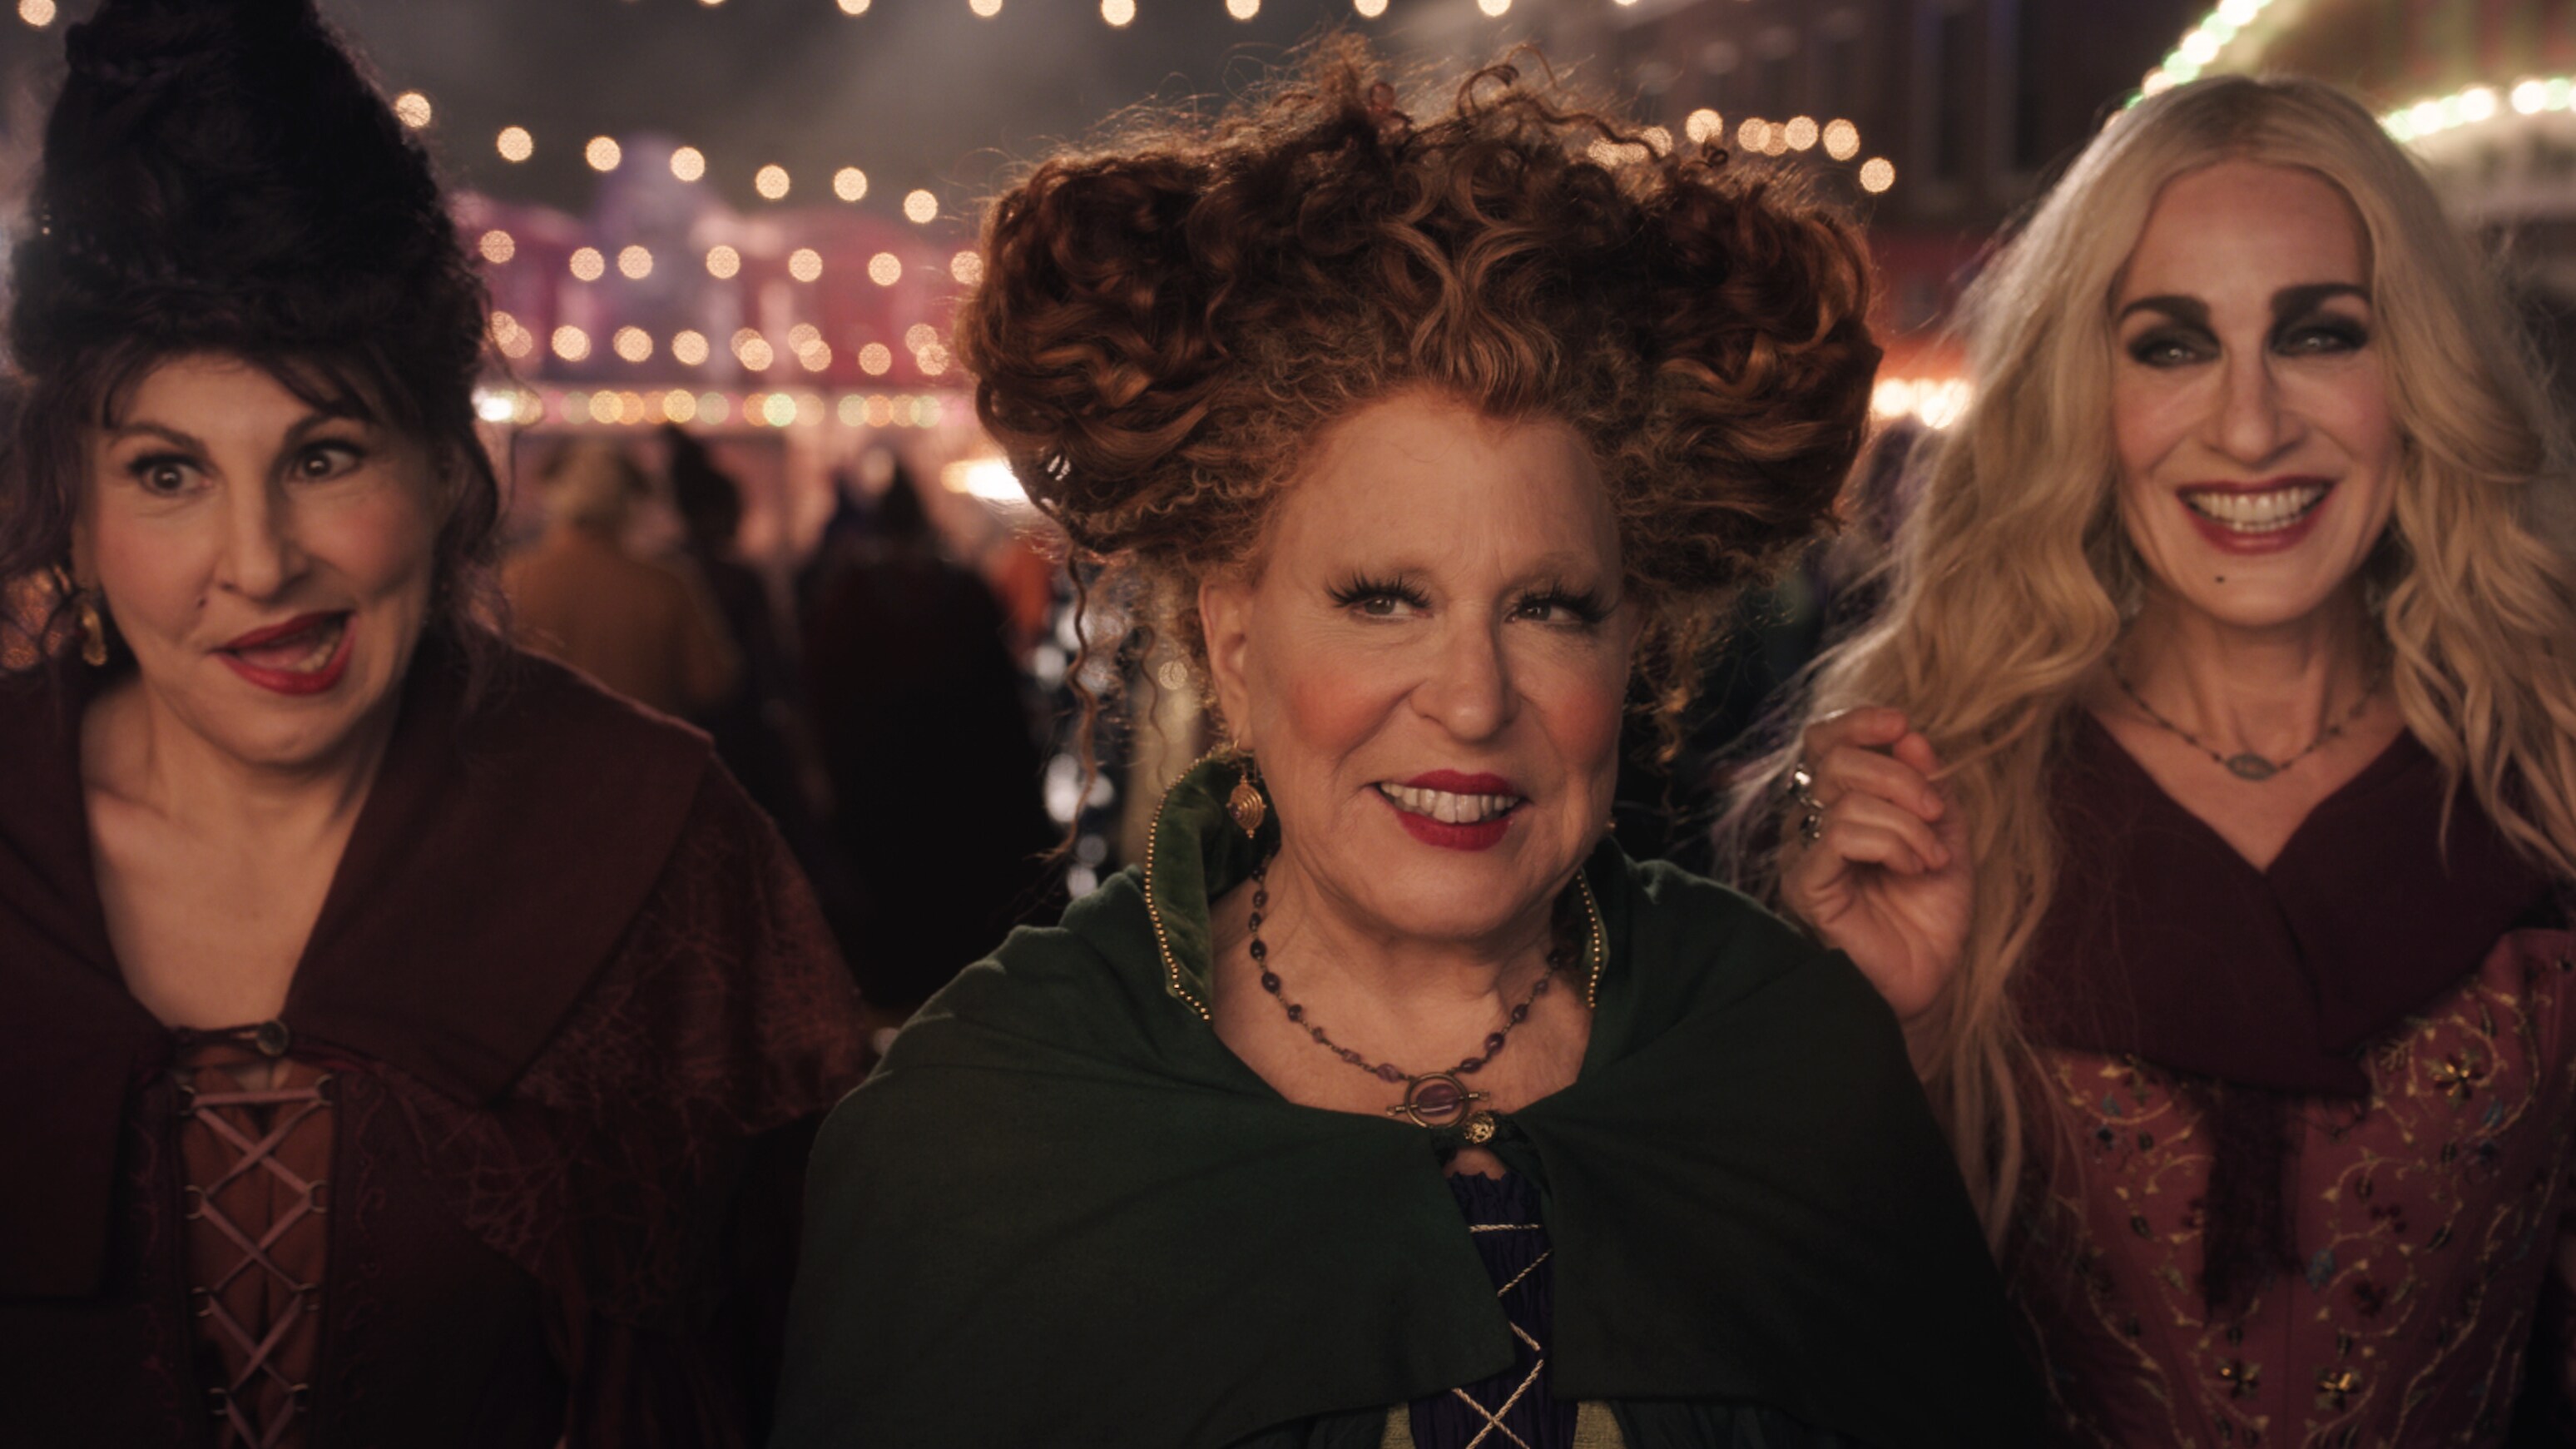 Trailer, Teaser Art And Stills For The Highly Anticipated Disney+ Original Movie “Hocus Pocus 2,” Reuniting Bette Midler, Sarah Jessica Parker And Kathy Najimy, Available Now